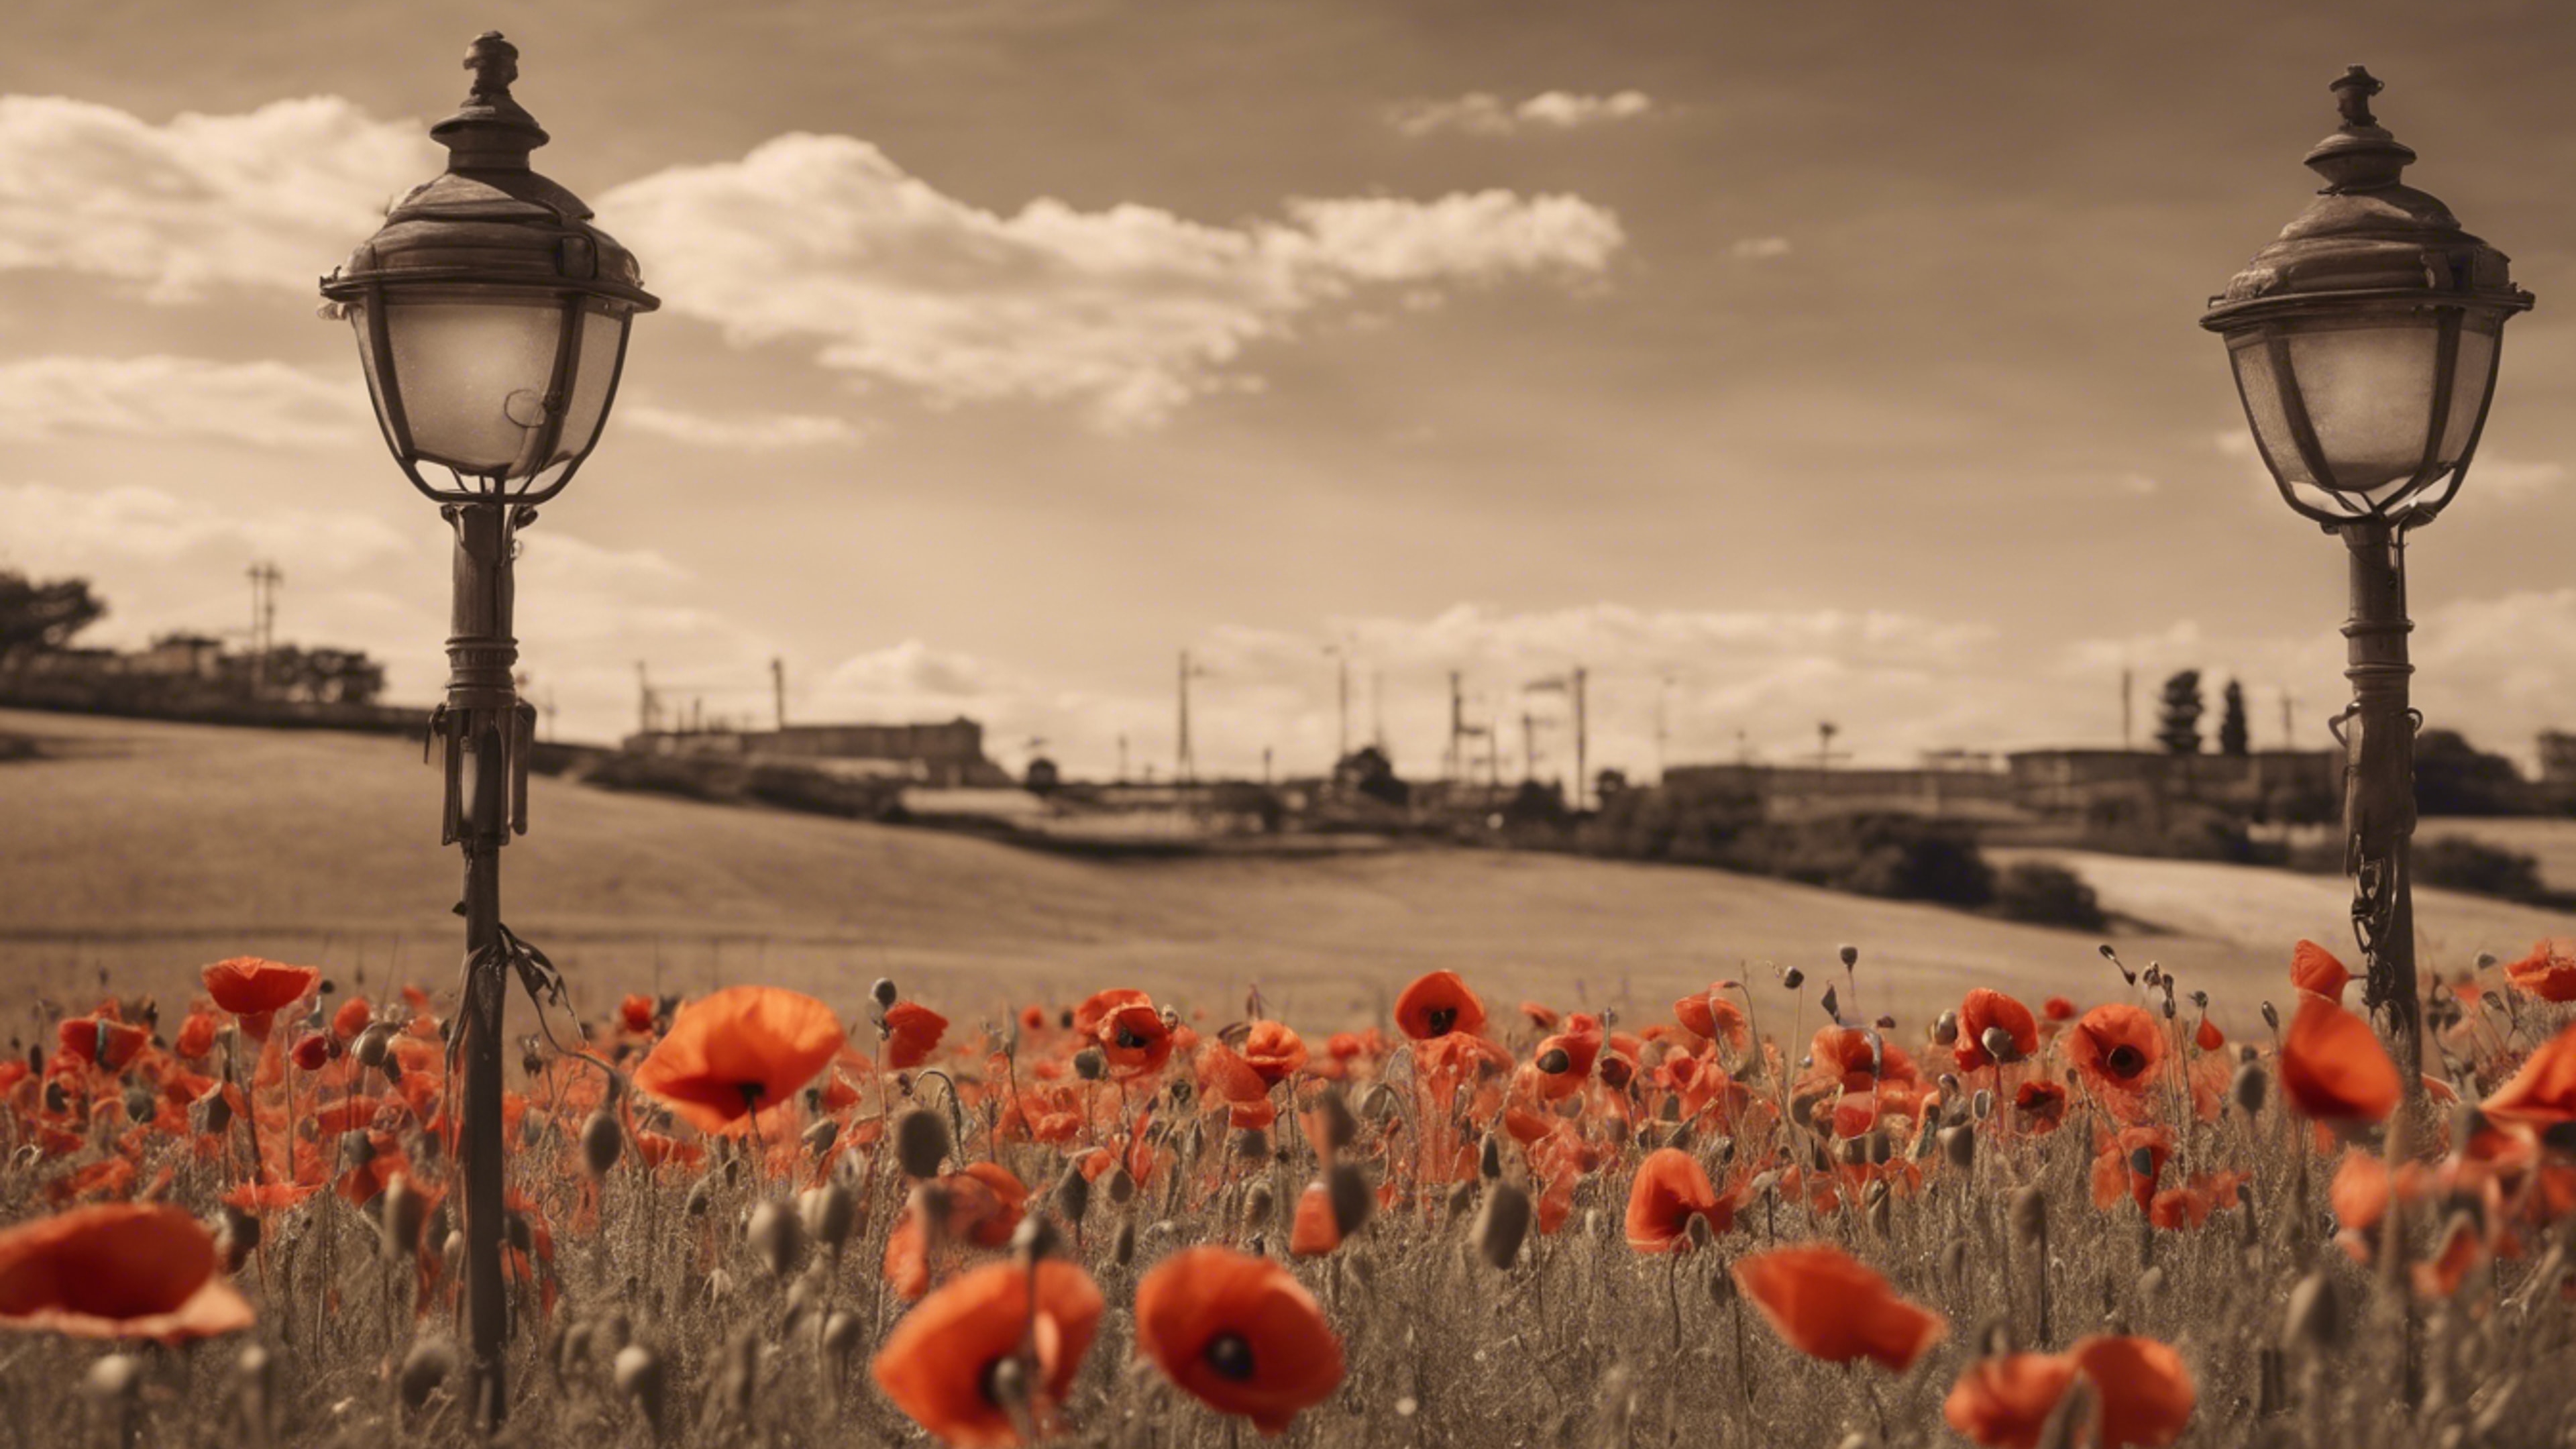 A landscape captured in sepia tones featuring poppies field under old styled streetlights.壁紙[182b8684de244d3a8221]